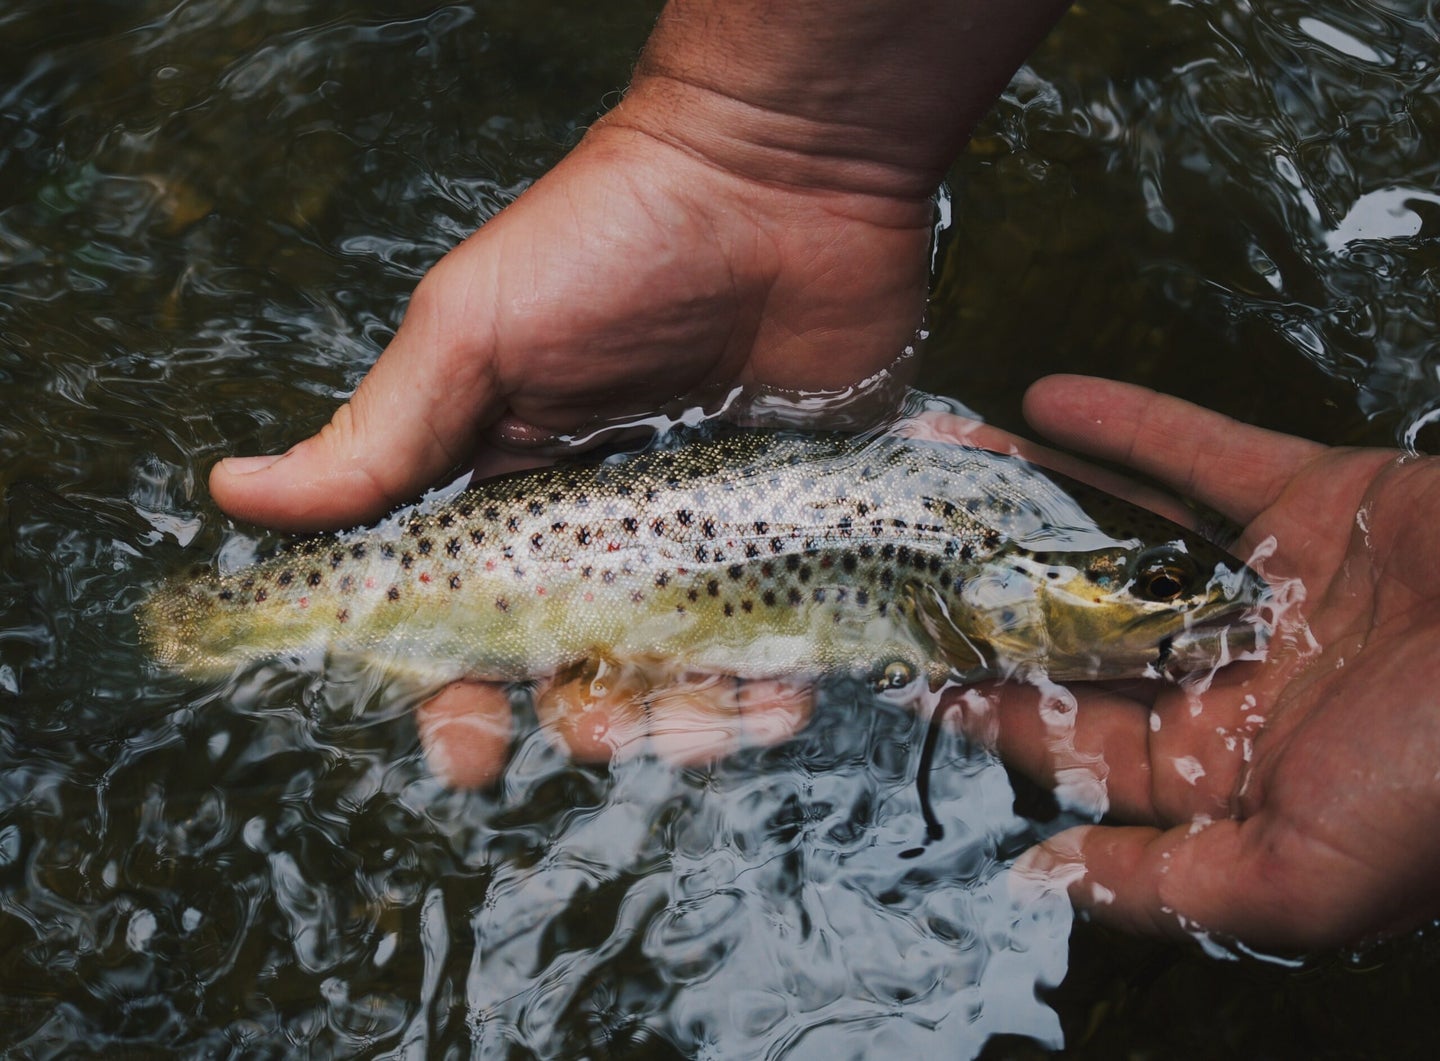 Hands holding trout underwater.